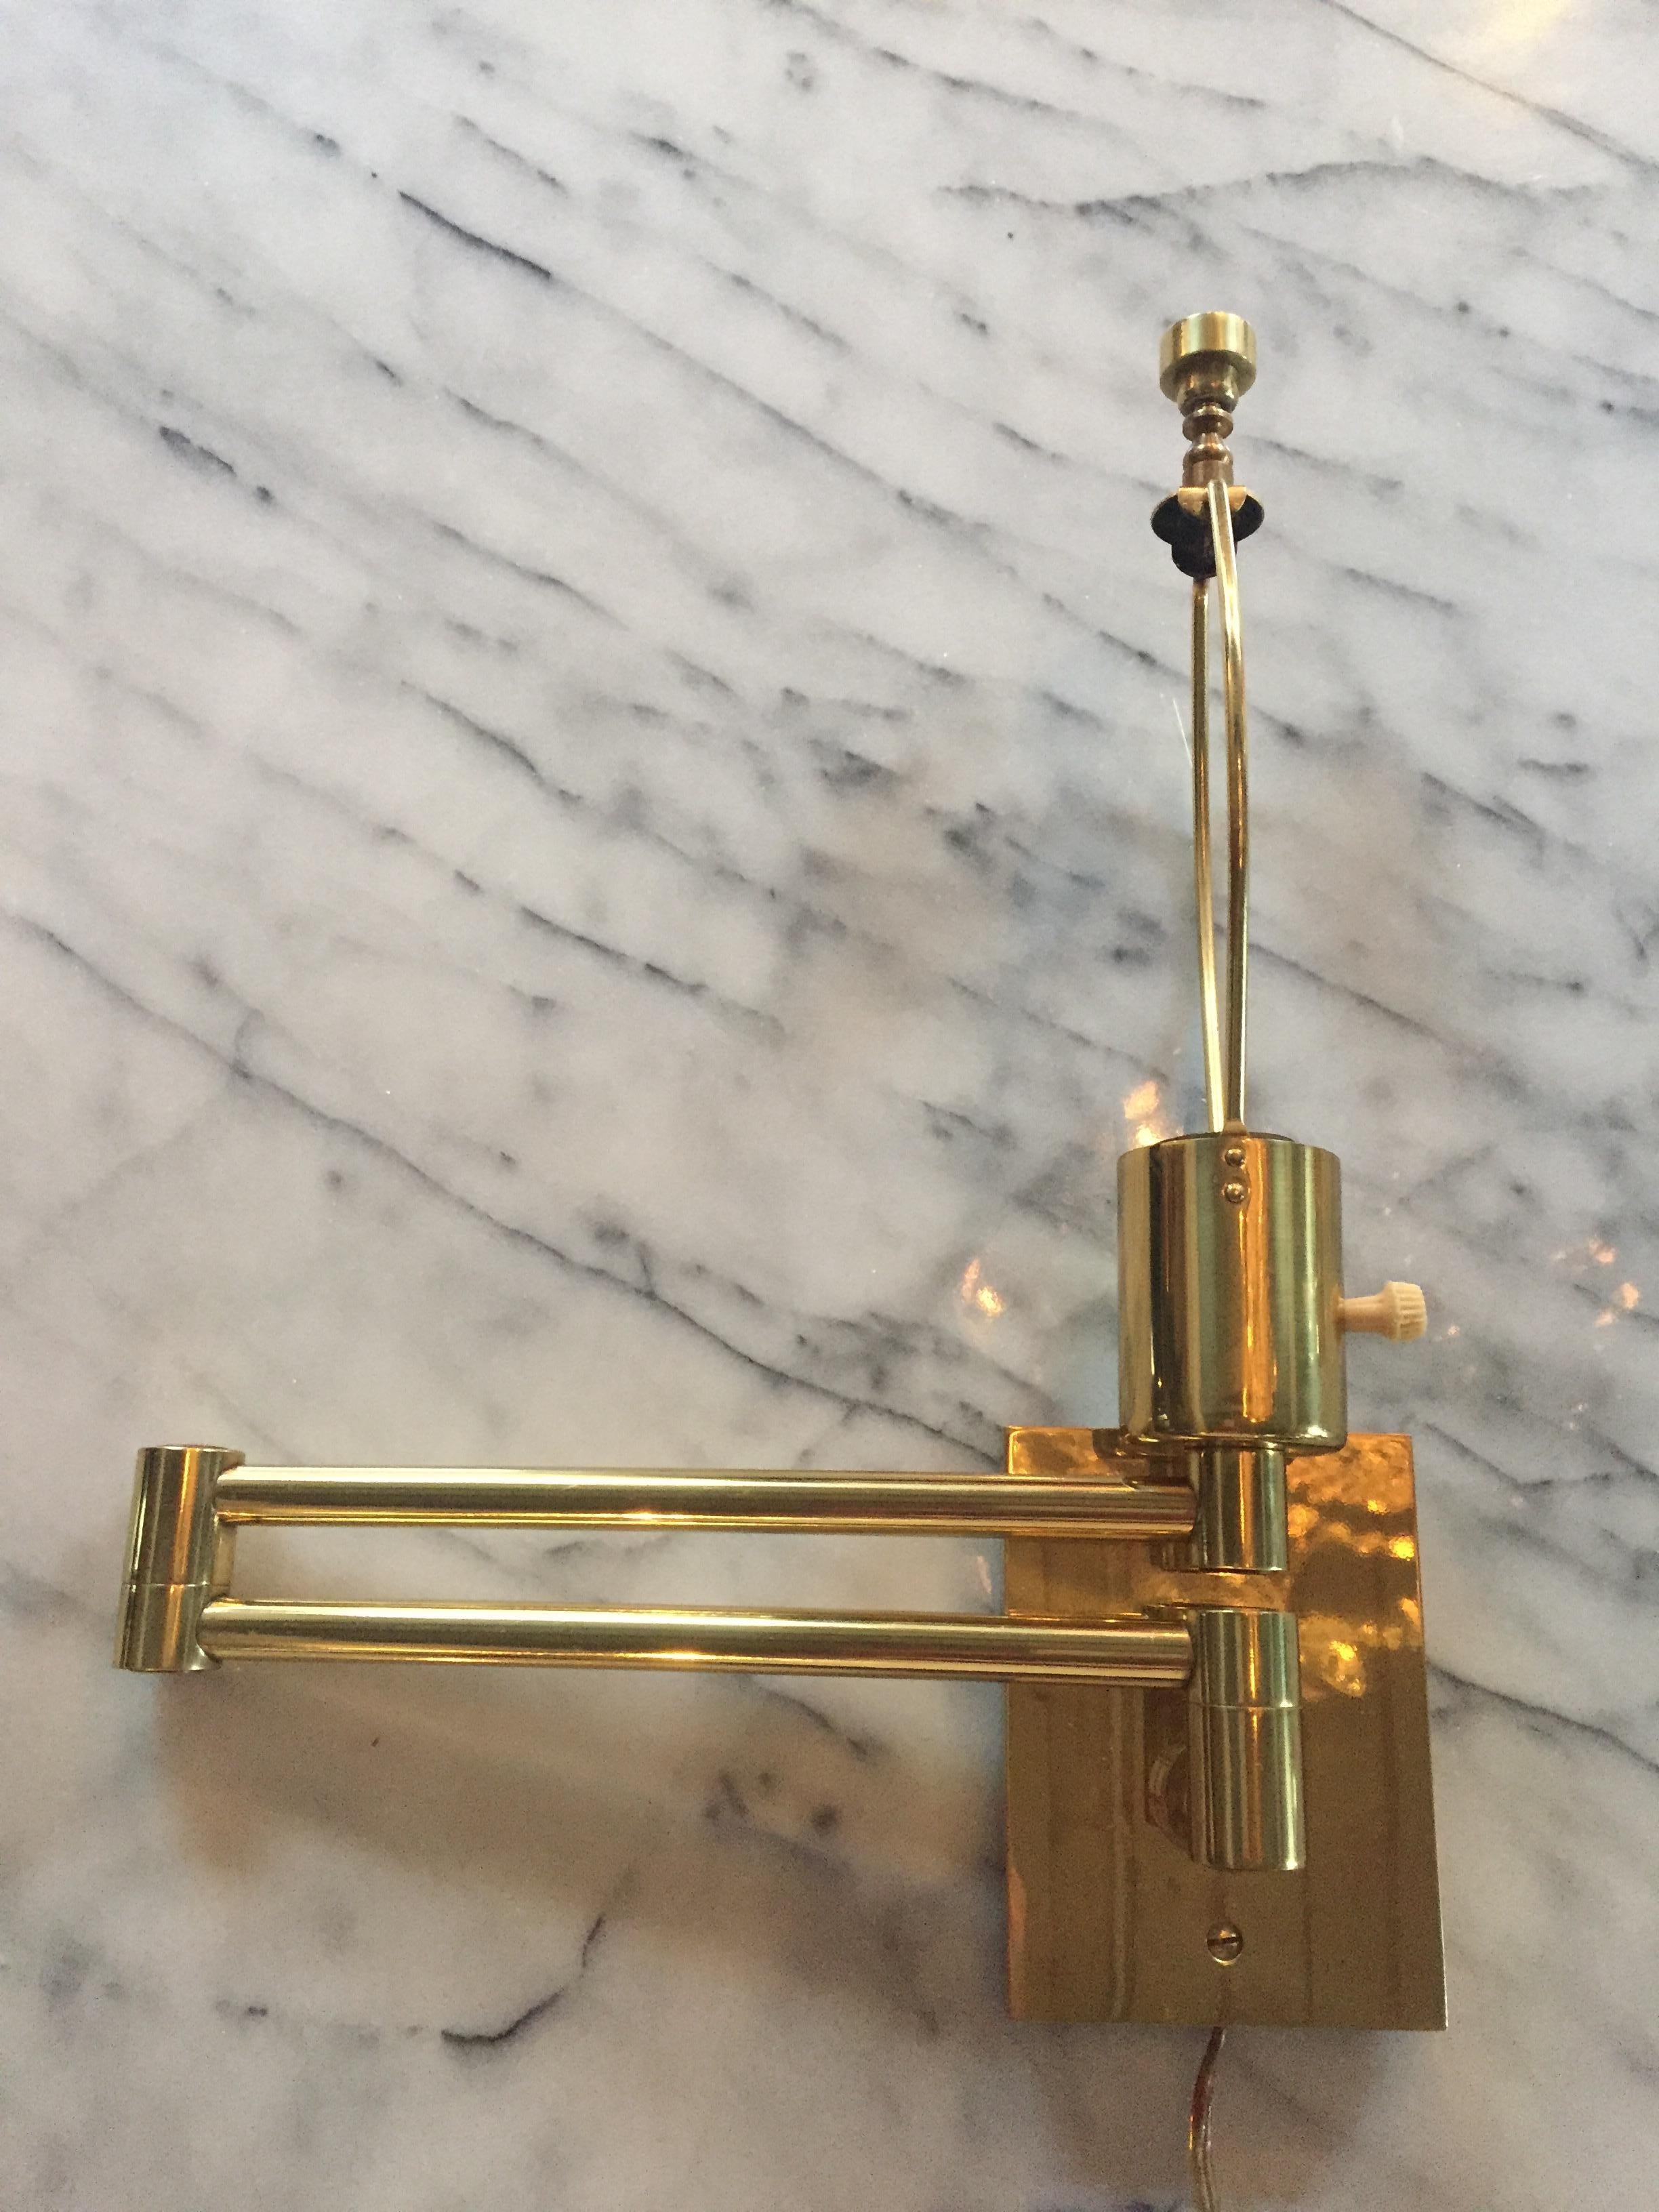 A classic vintage pair of polished brass double swing arm sconces with original harps and solid brass finials as well as solid brass column cord covers. Signed Hansen on original cast brass rectangular backplates (3 1/2